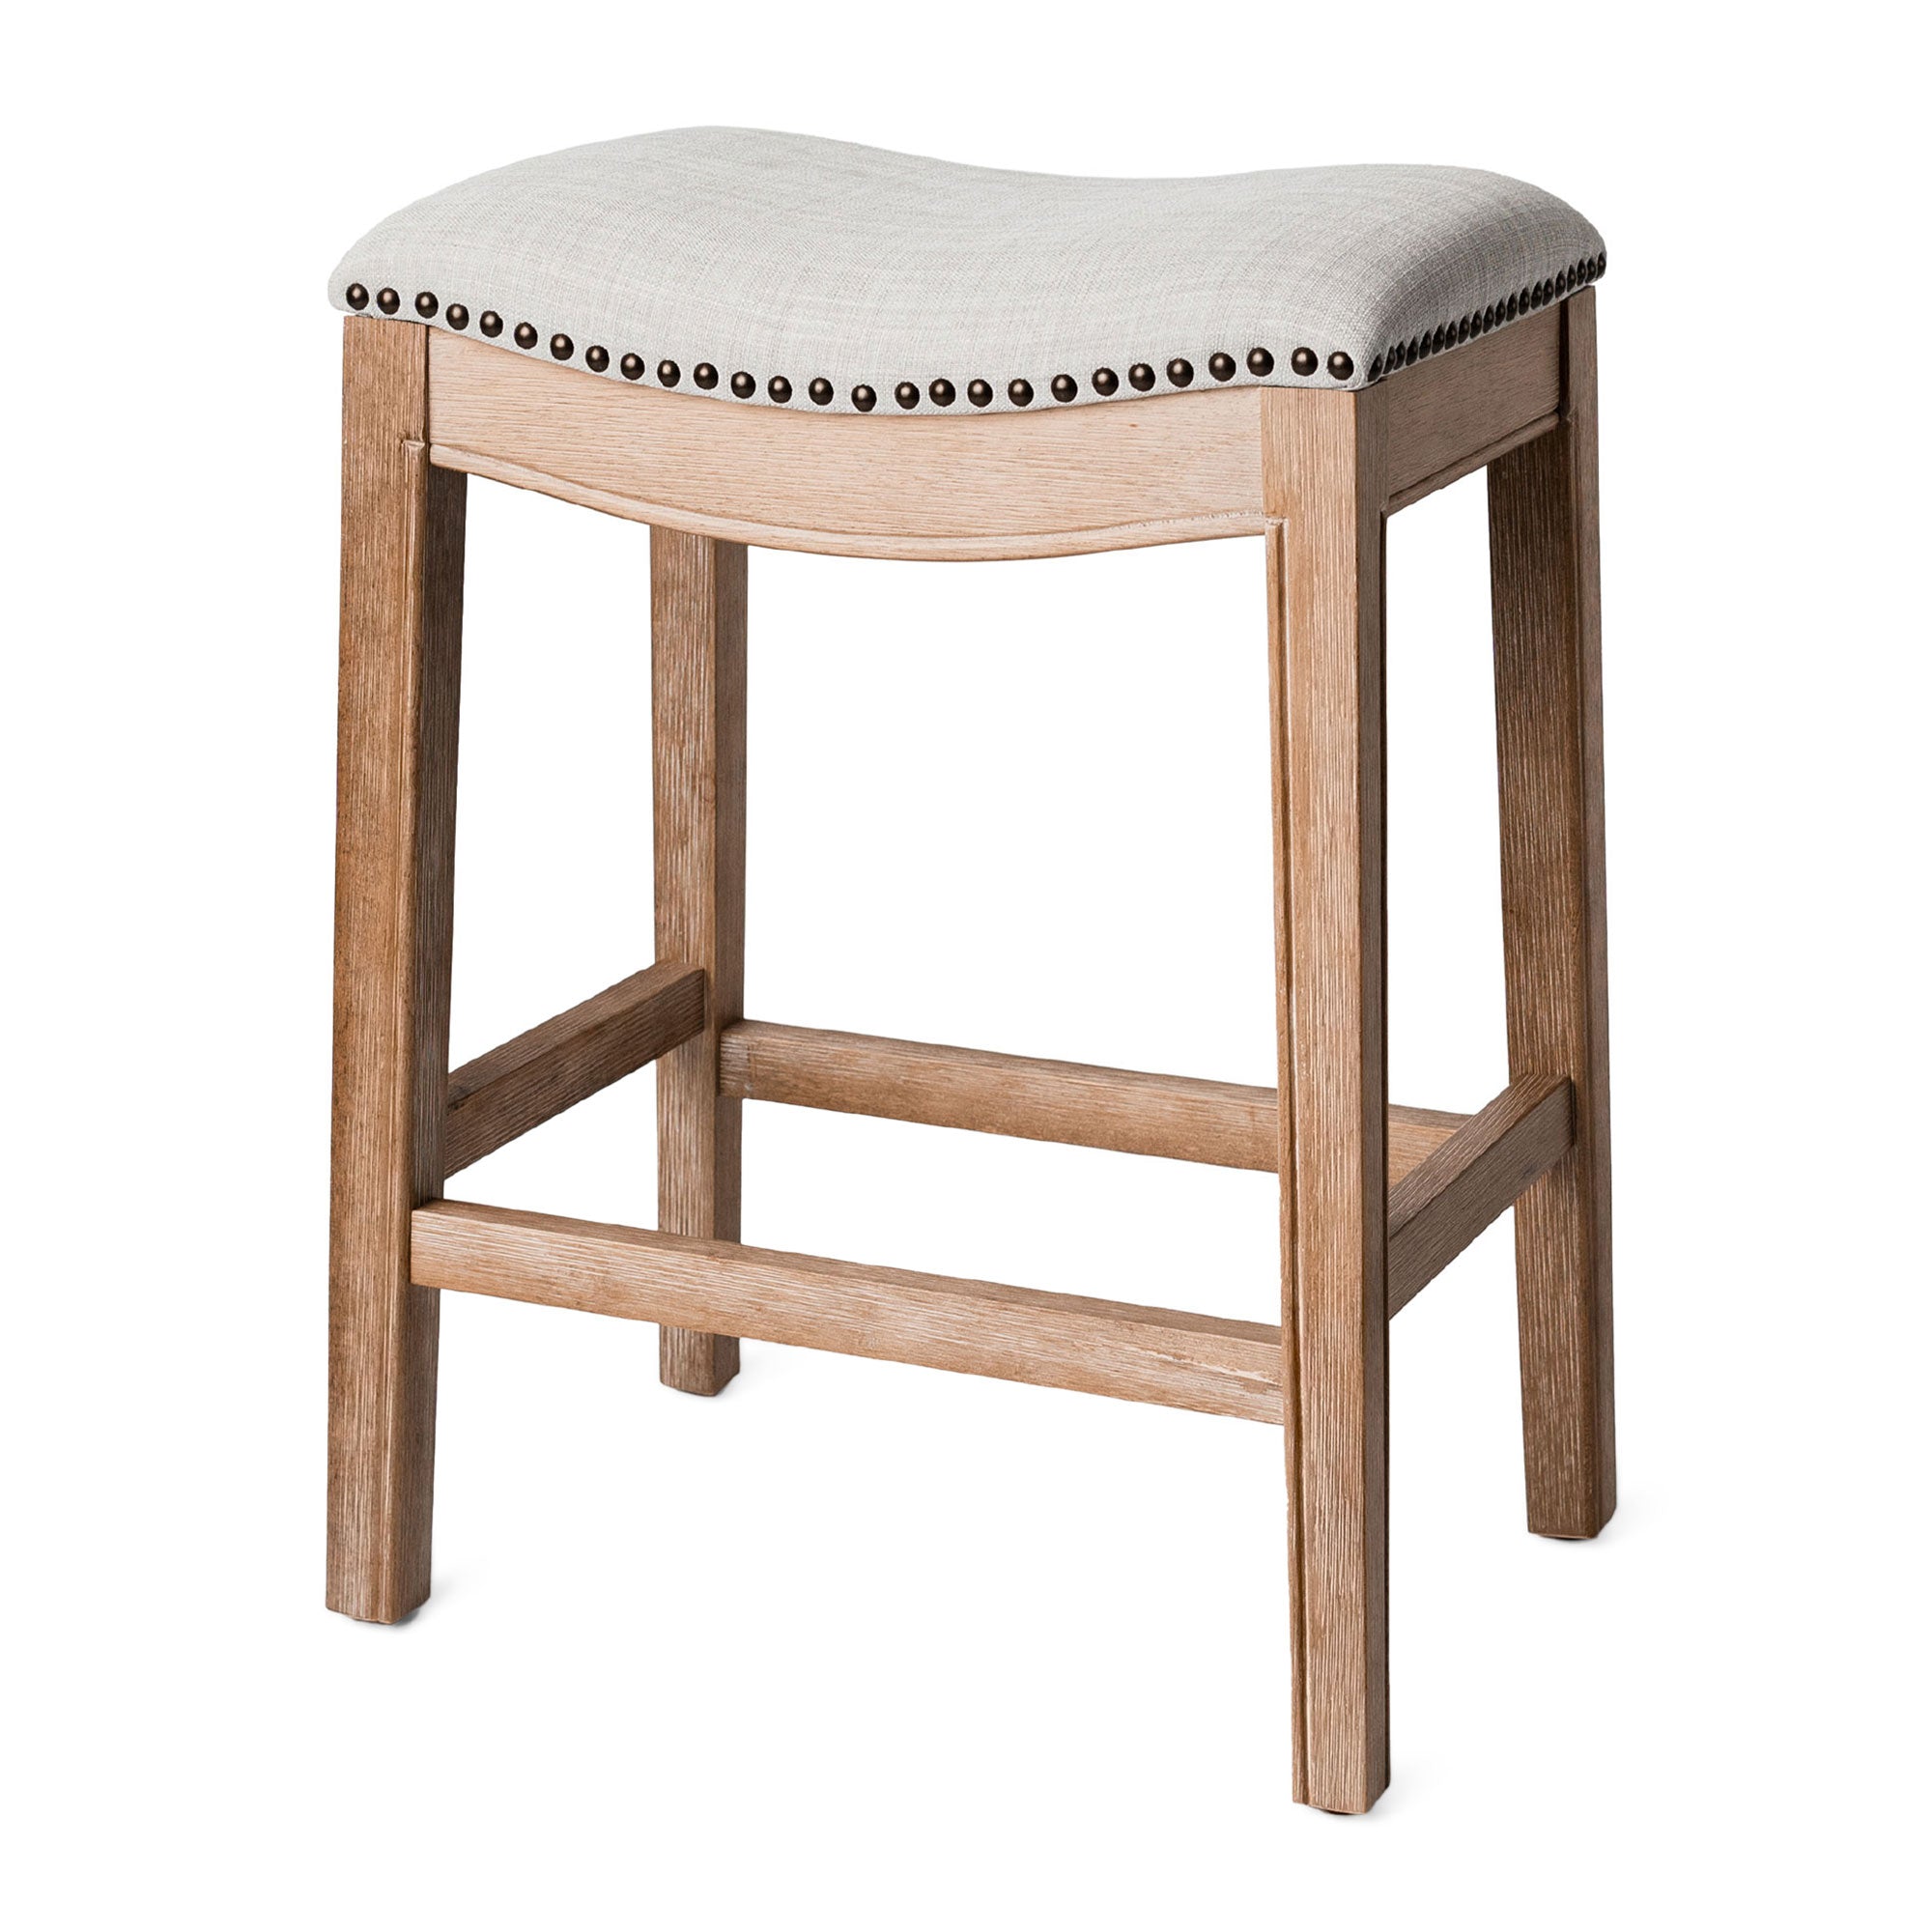 Adrien Saddle Counter Stool in Weathered Oak Finish w/ Sand Color Fabric Upholstery